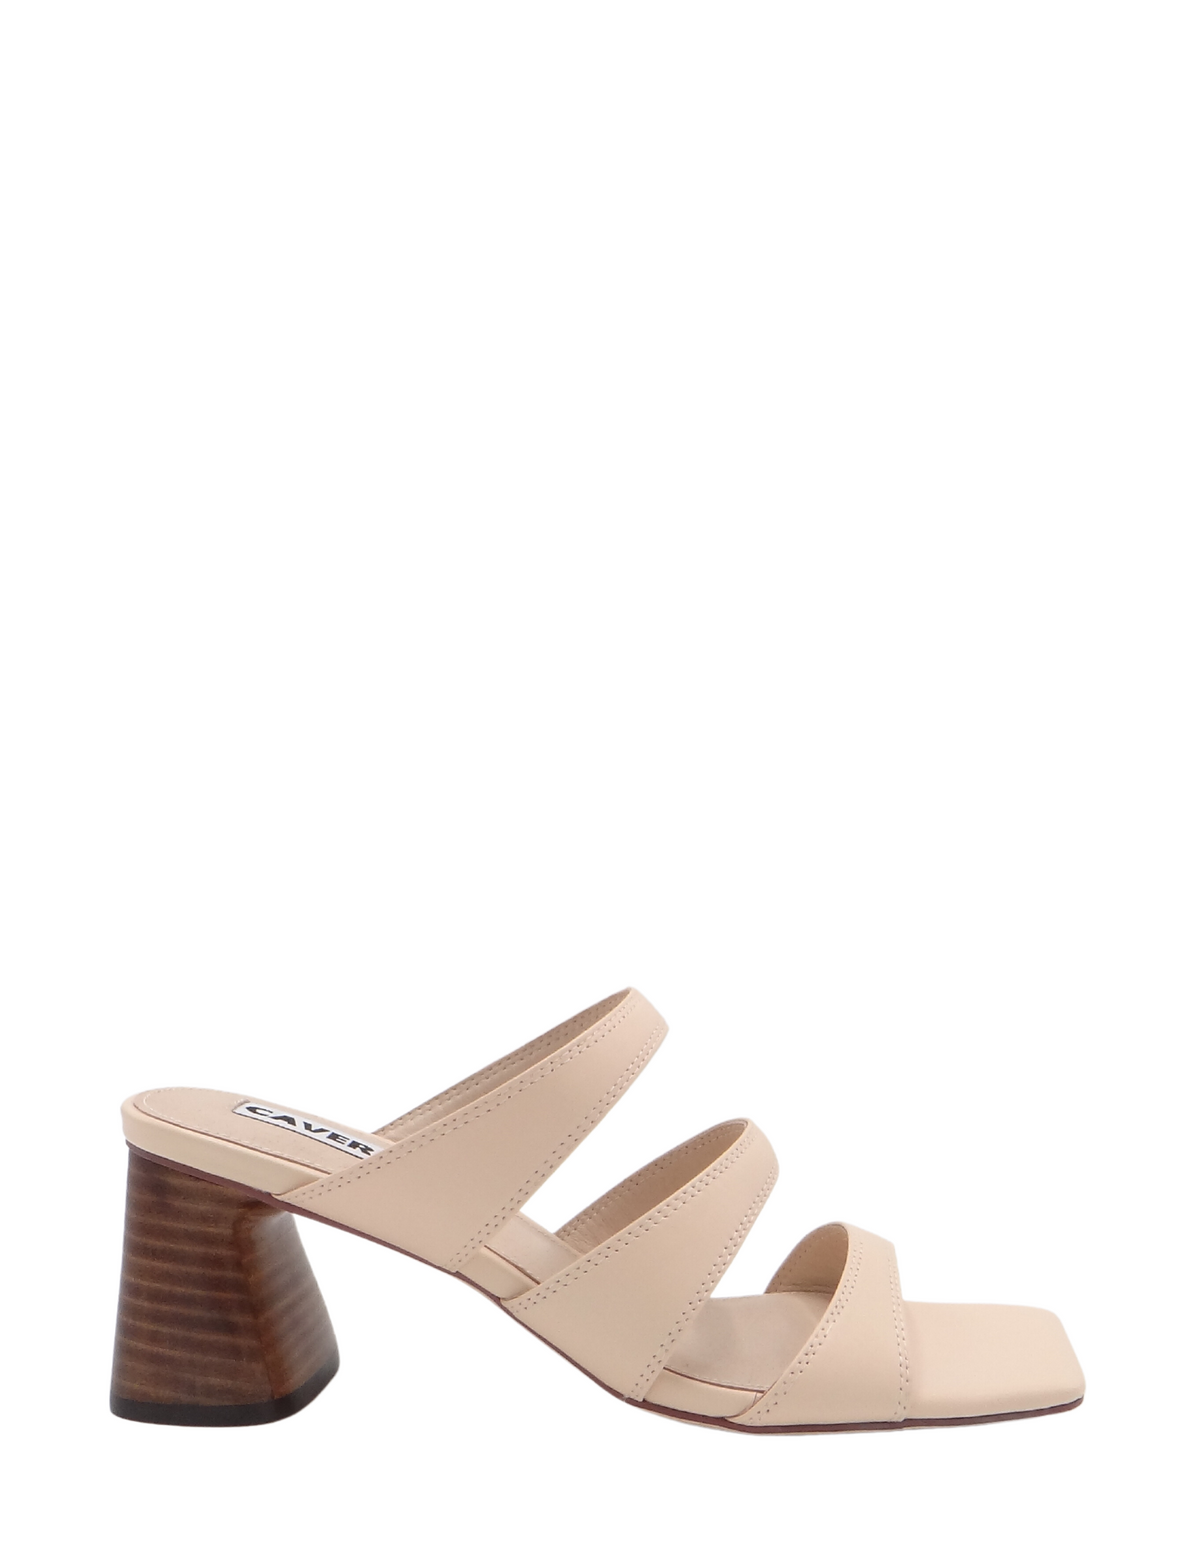 Parallel Culture Shoes and Fashion Online HEELS CAVERLEY DELFI MULE PEACH